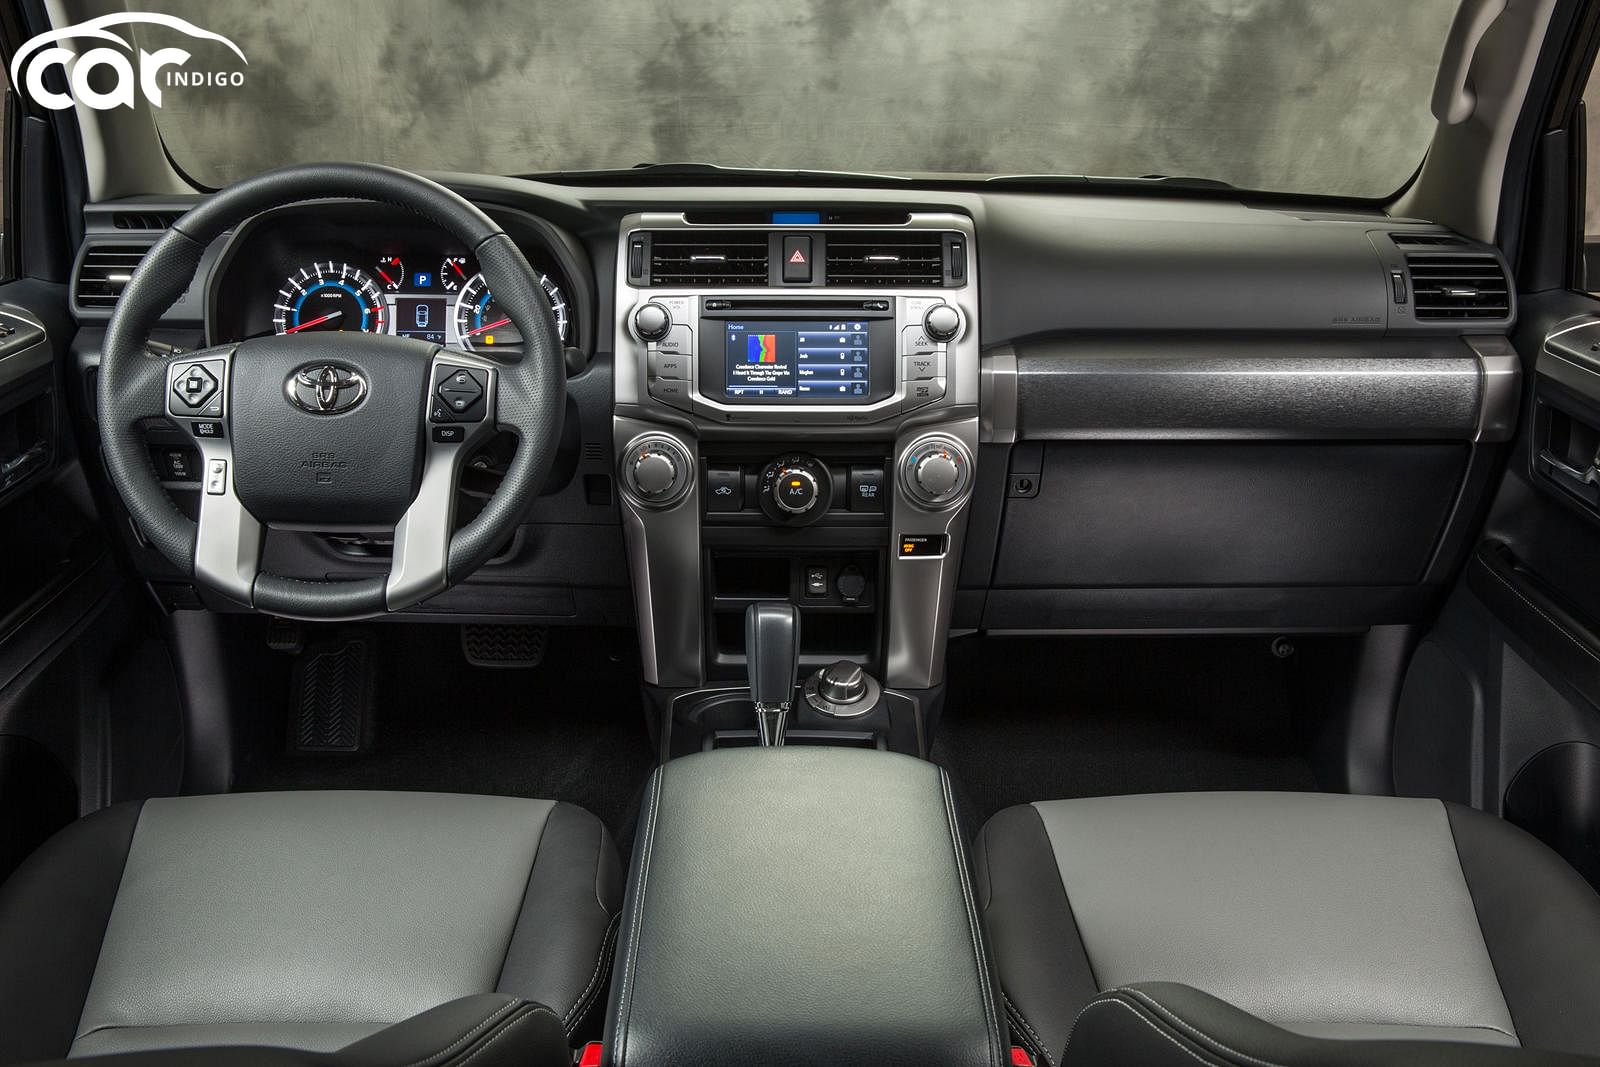 2015 Toyota 4Runner Interior Review - Seating, Infotainment, Dashboard and  Features | CarIndigo.com